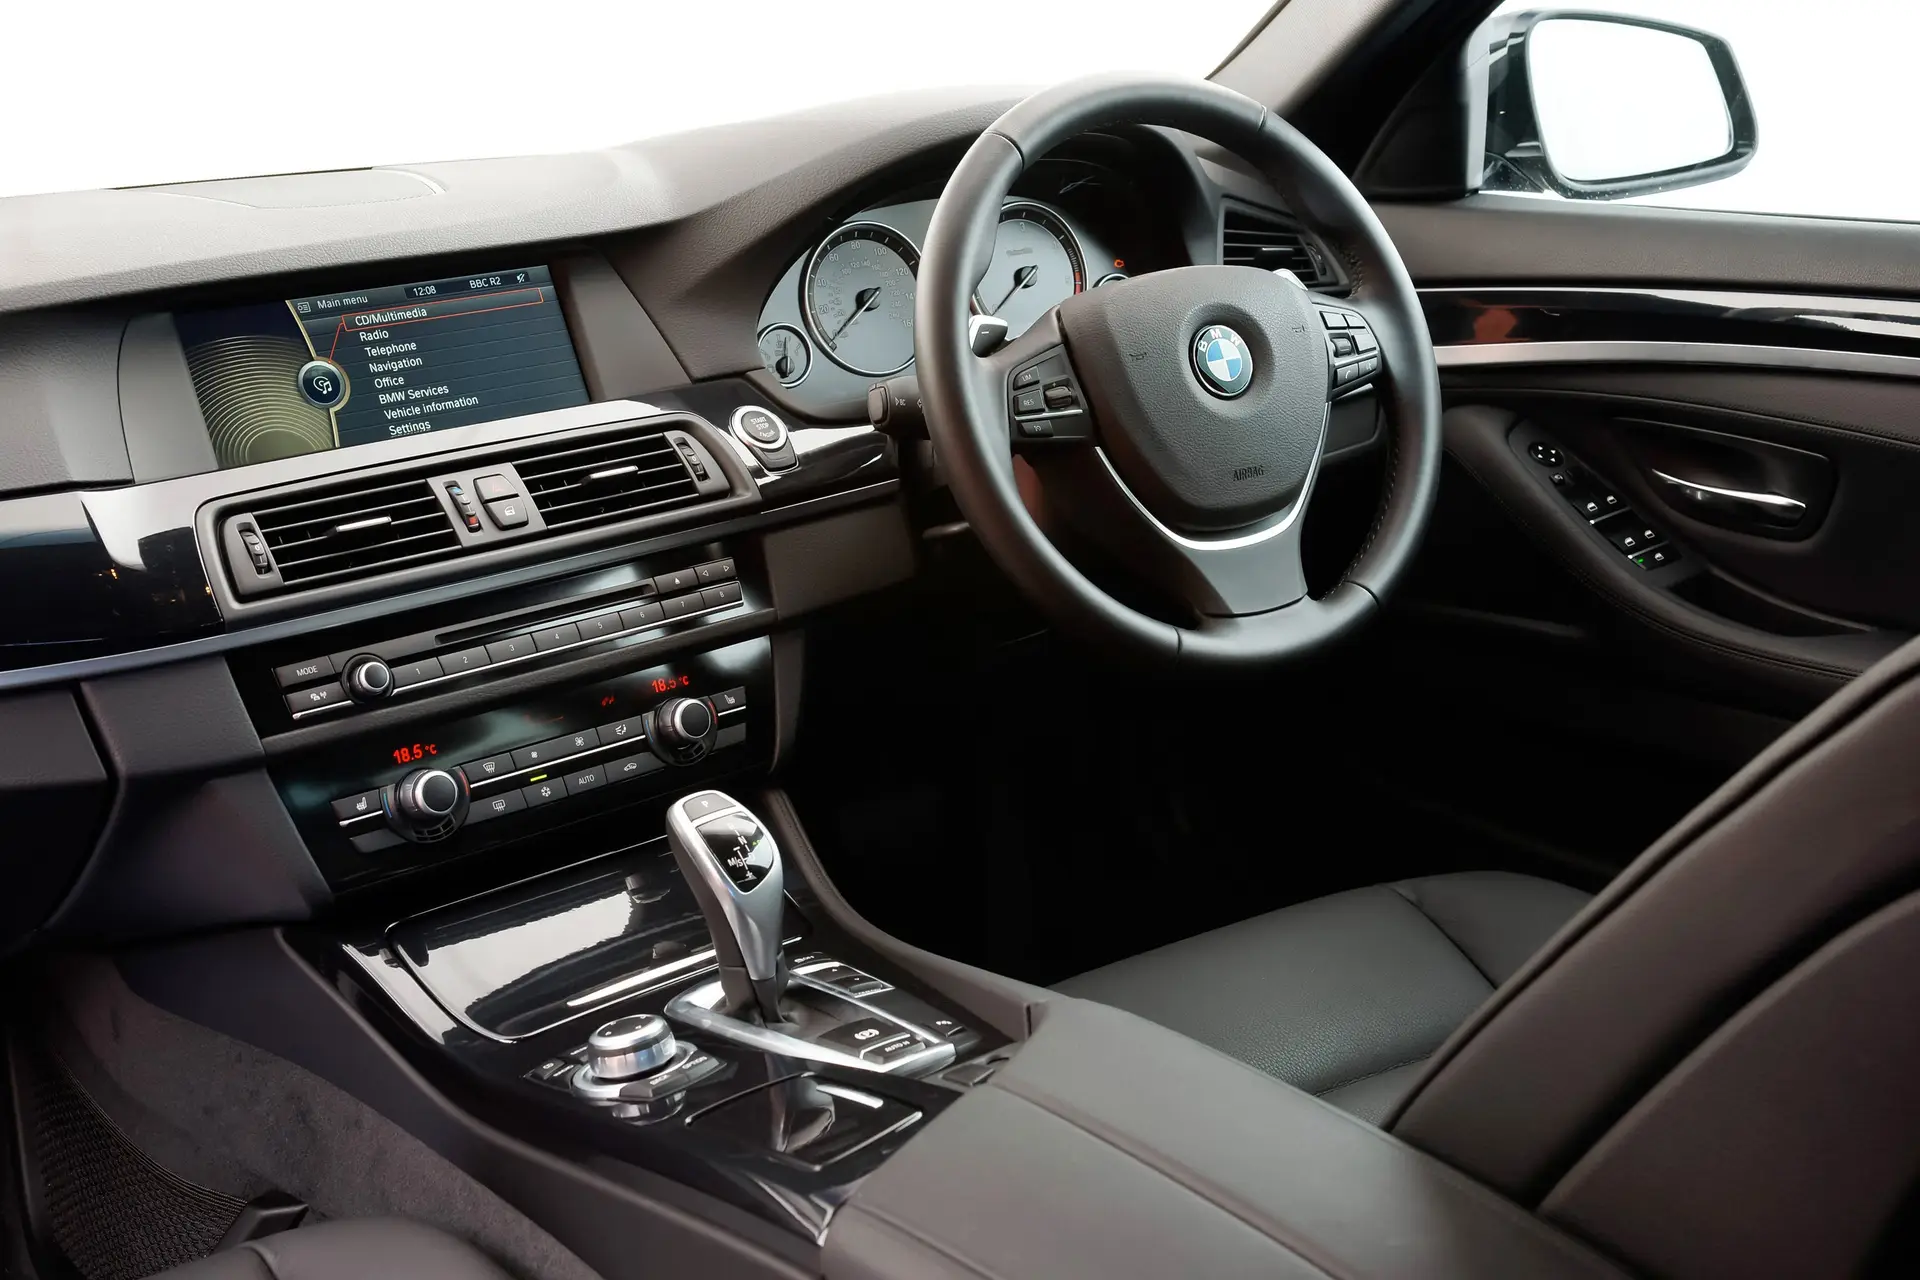 BMW 5 Series Touring (2010-2017) Review: Interior close up photo of the BMW 5 Series Touring dashboard